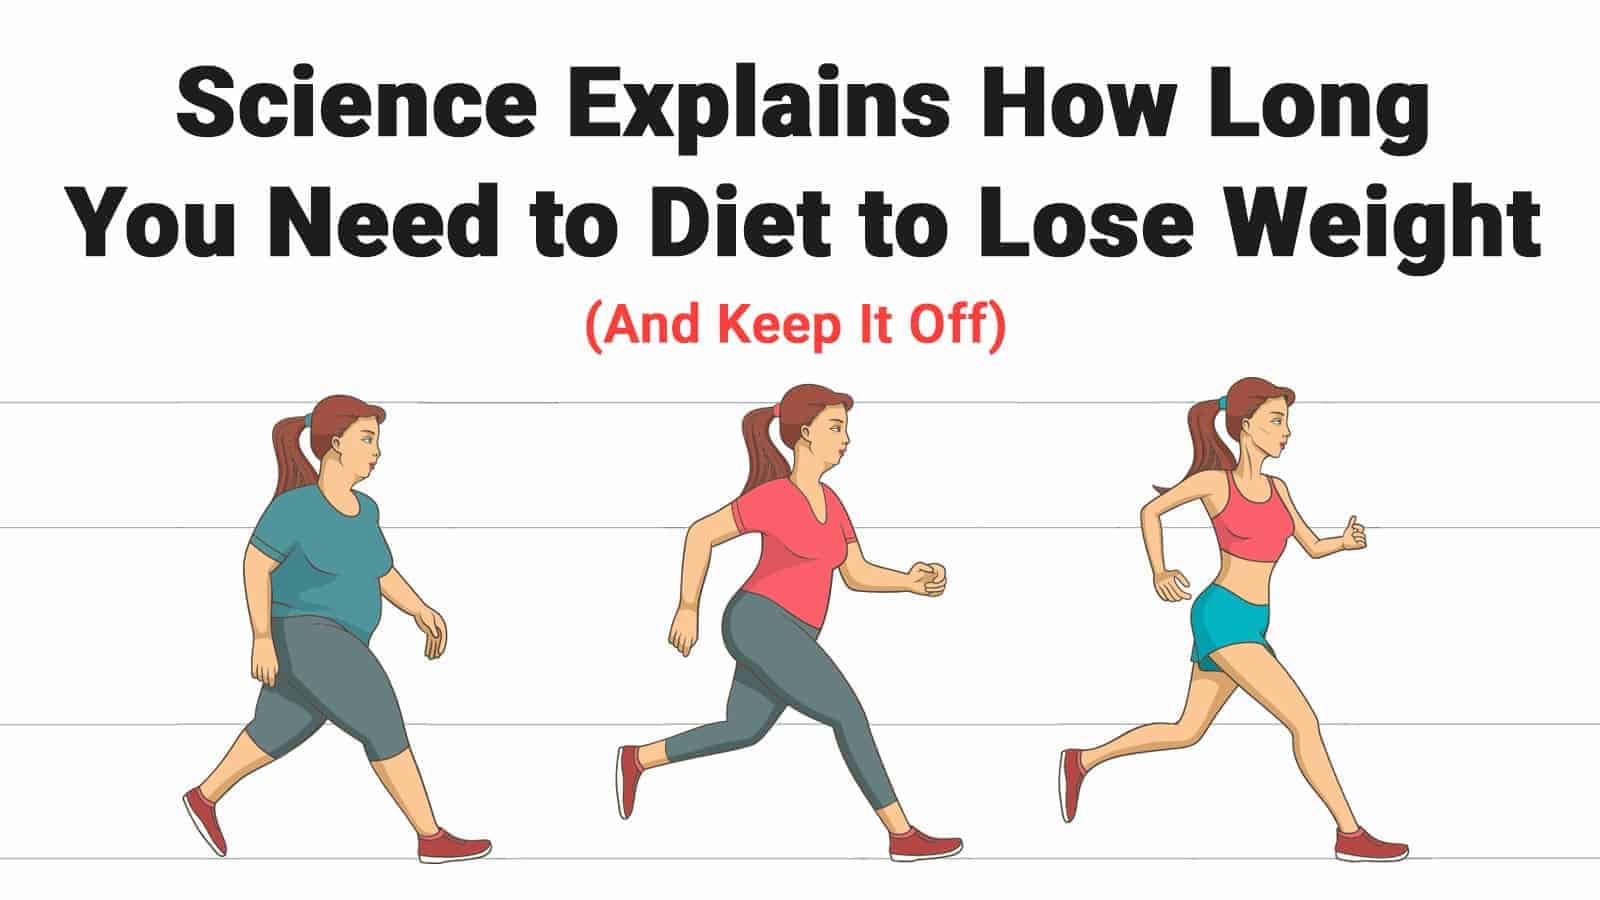 Science Explains How Long You Need to Diet to Lose Weight (And Keep It Off)